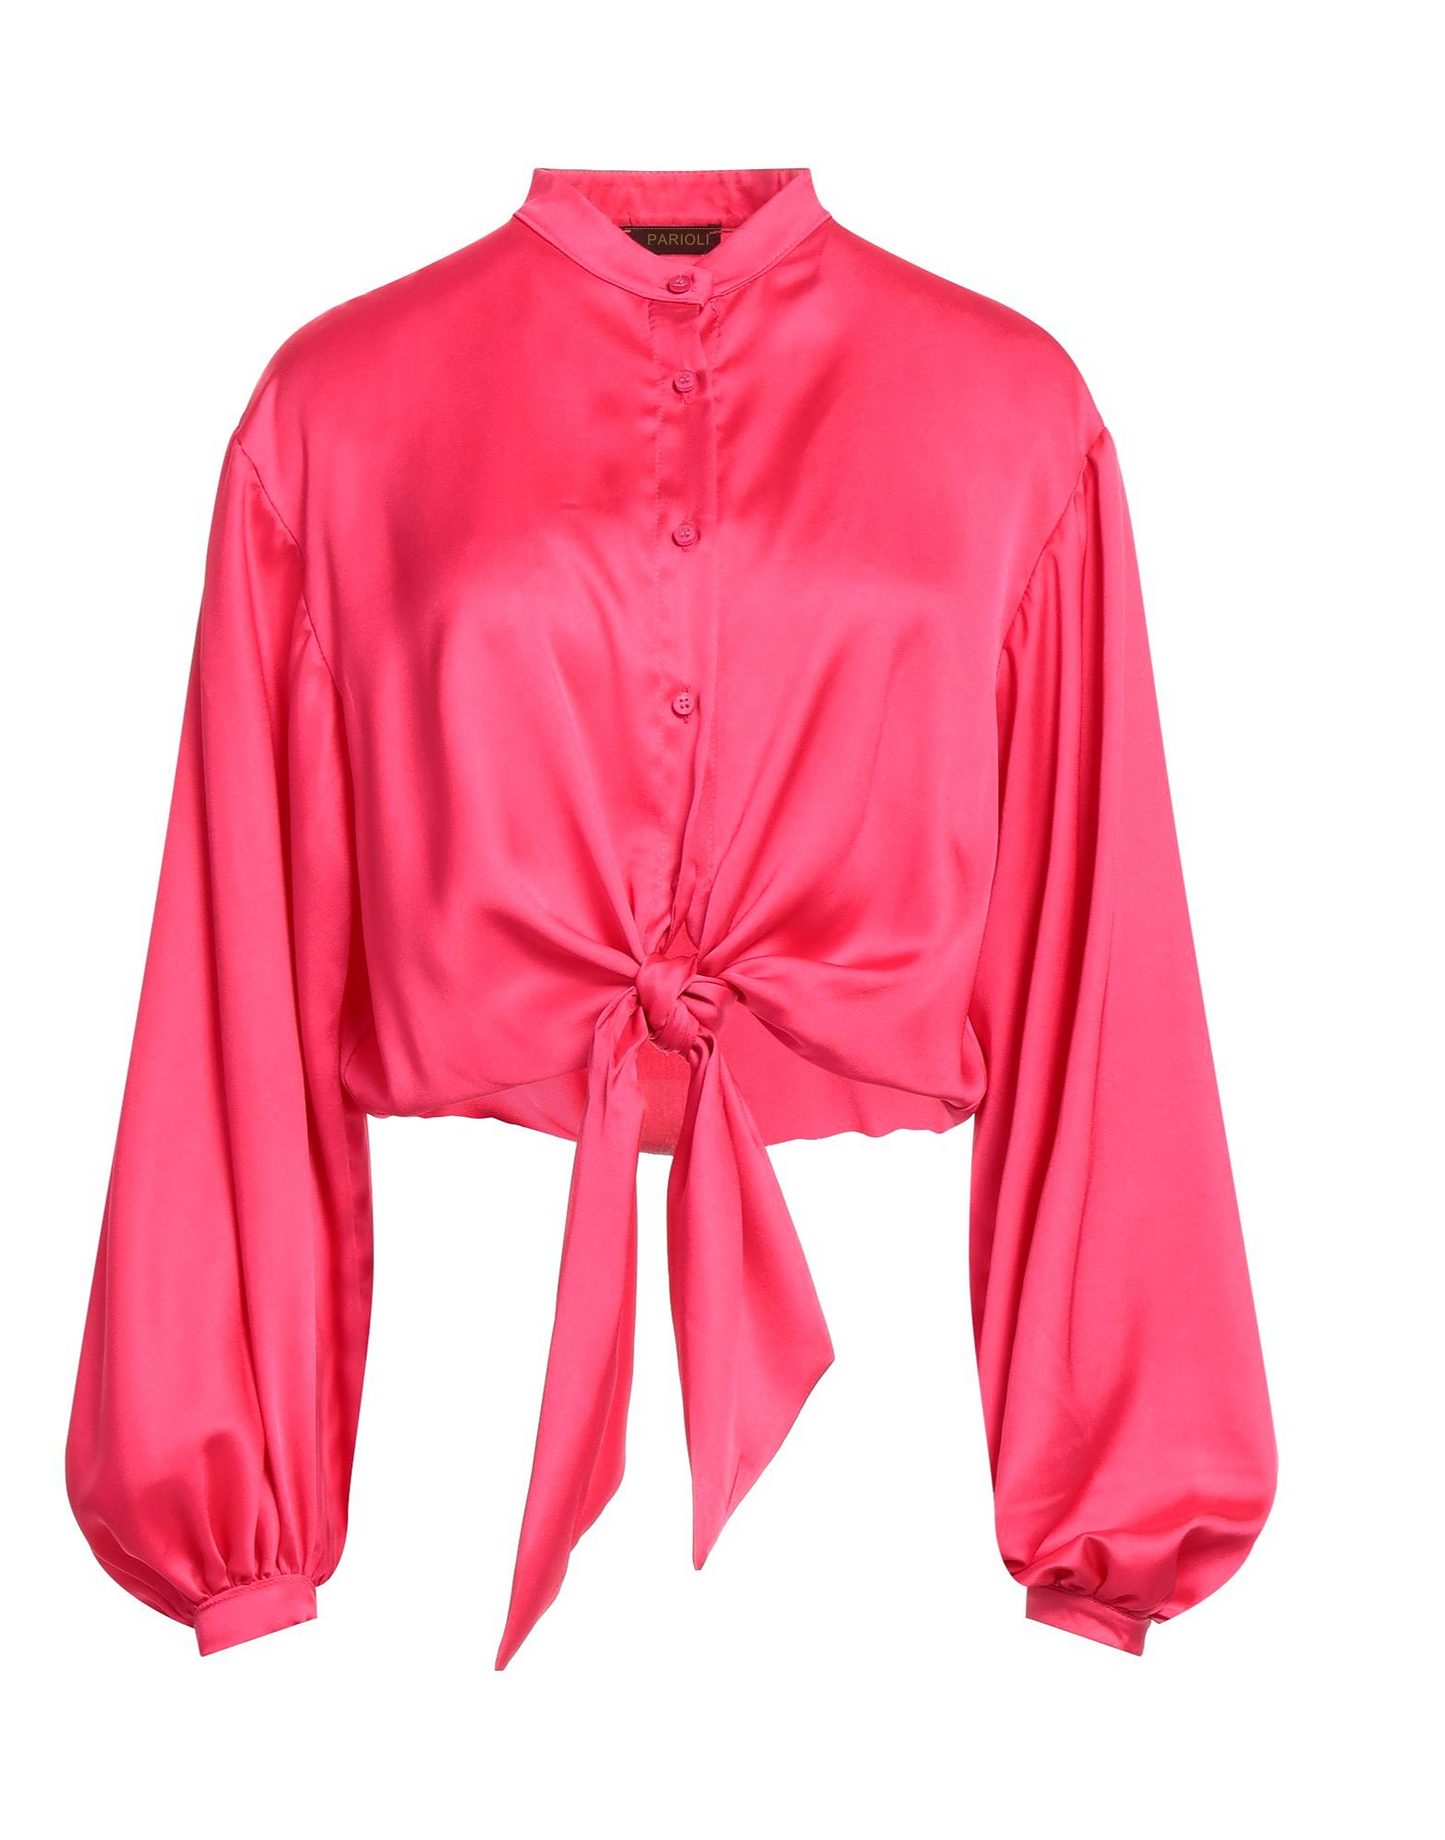 PARIOLI Women -Collection - Solid color Shirts & Blouses